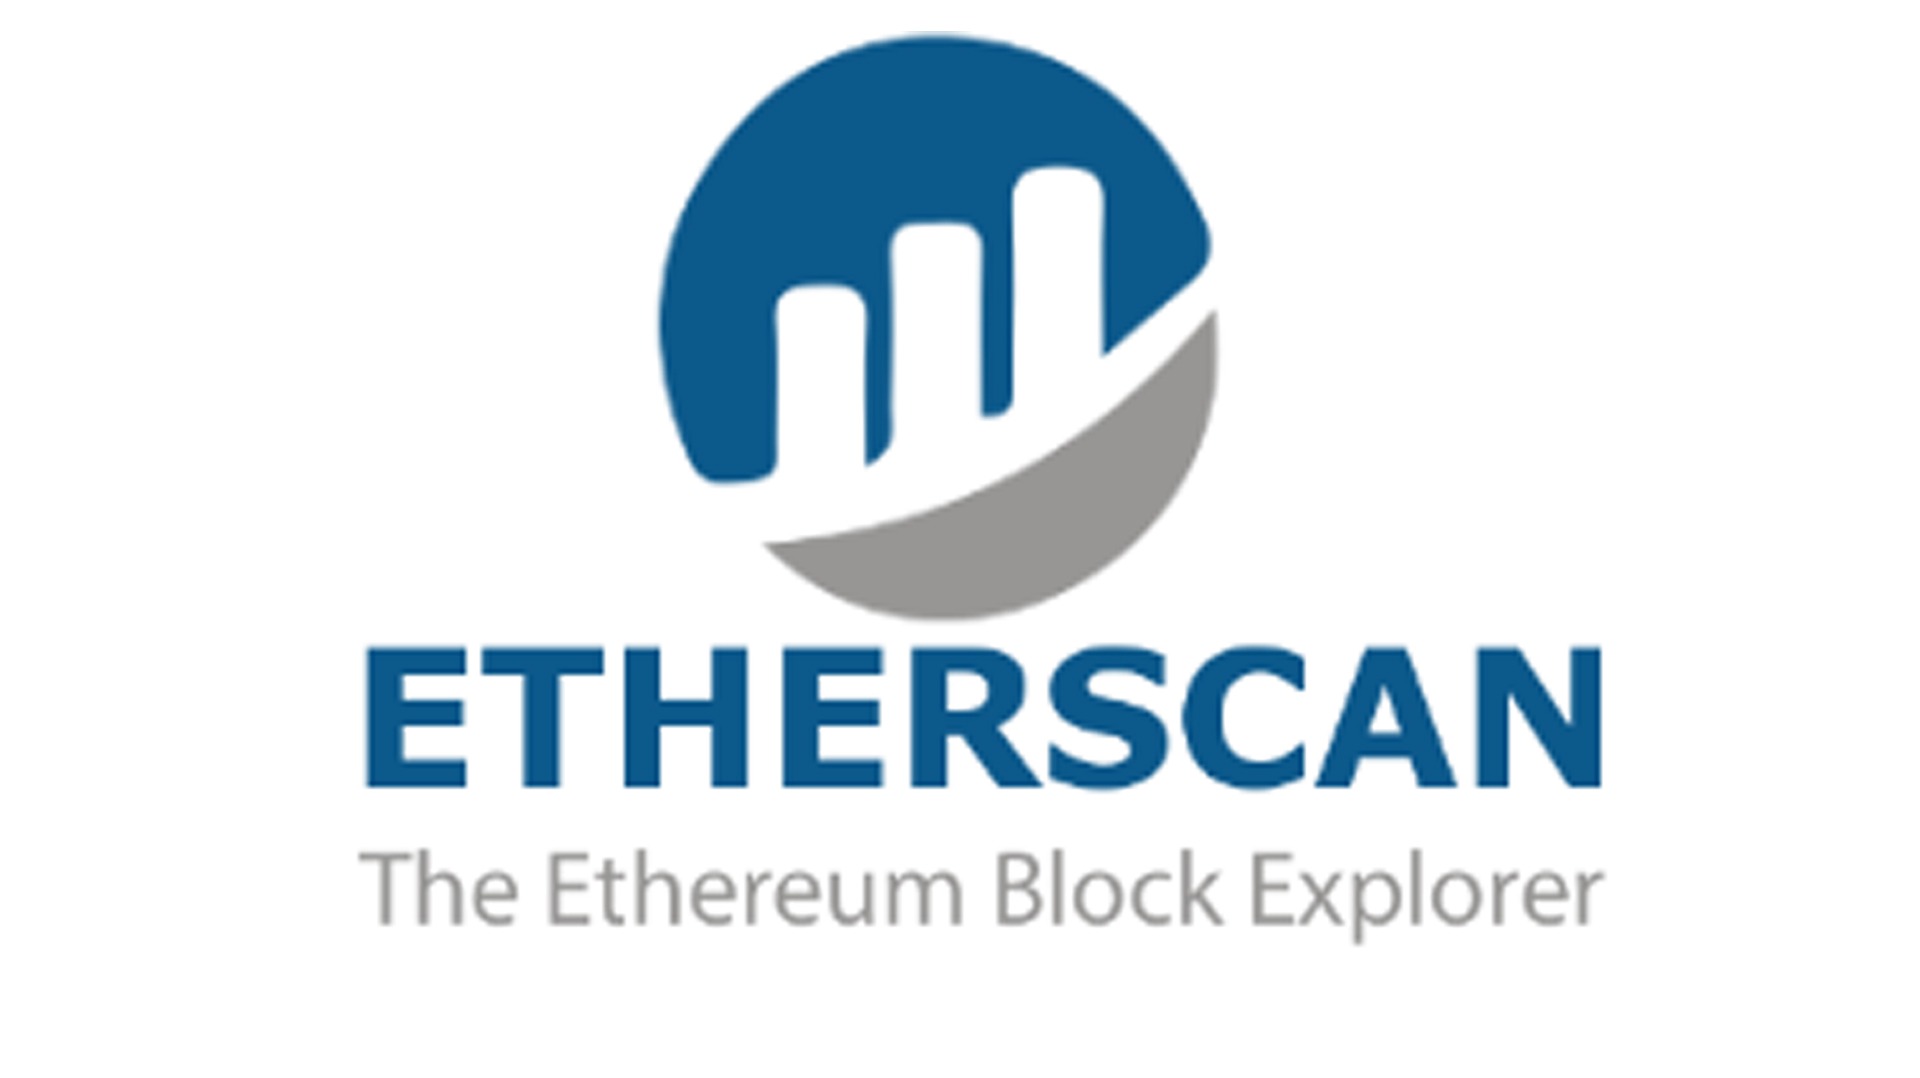 What Is Etherscan? How Does Etherscan Work?